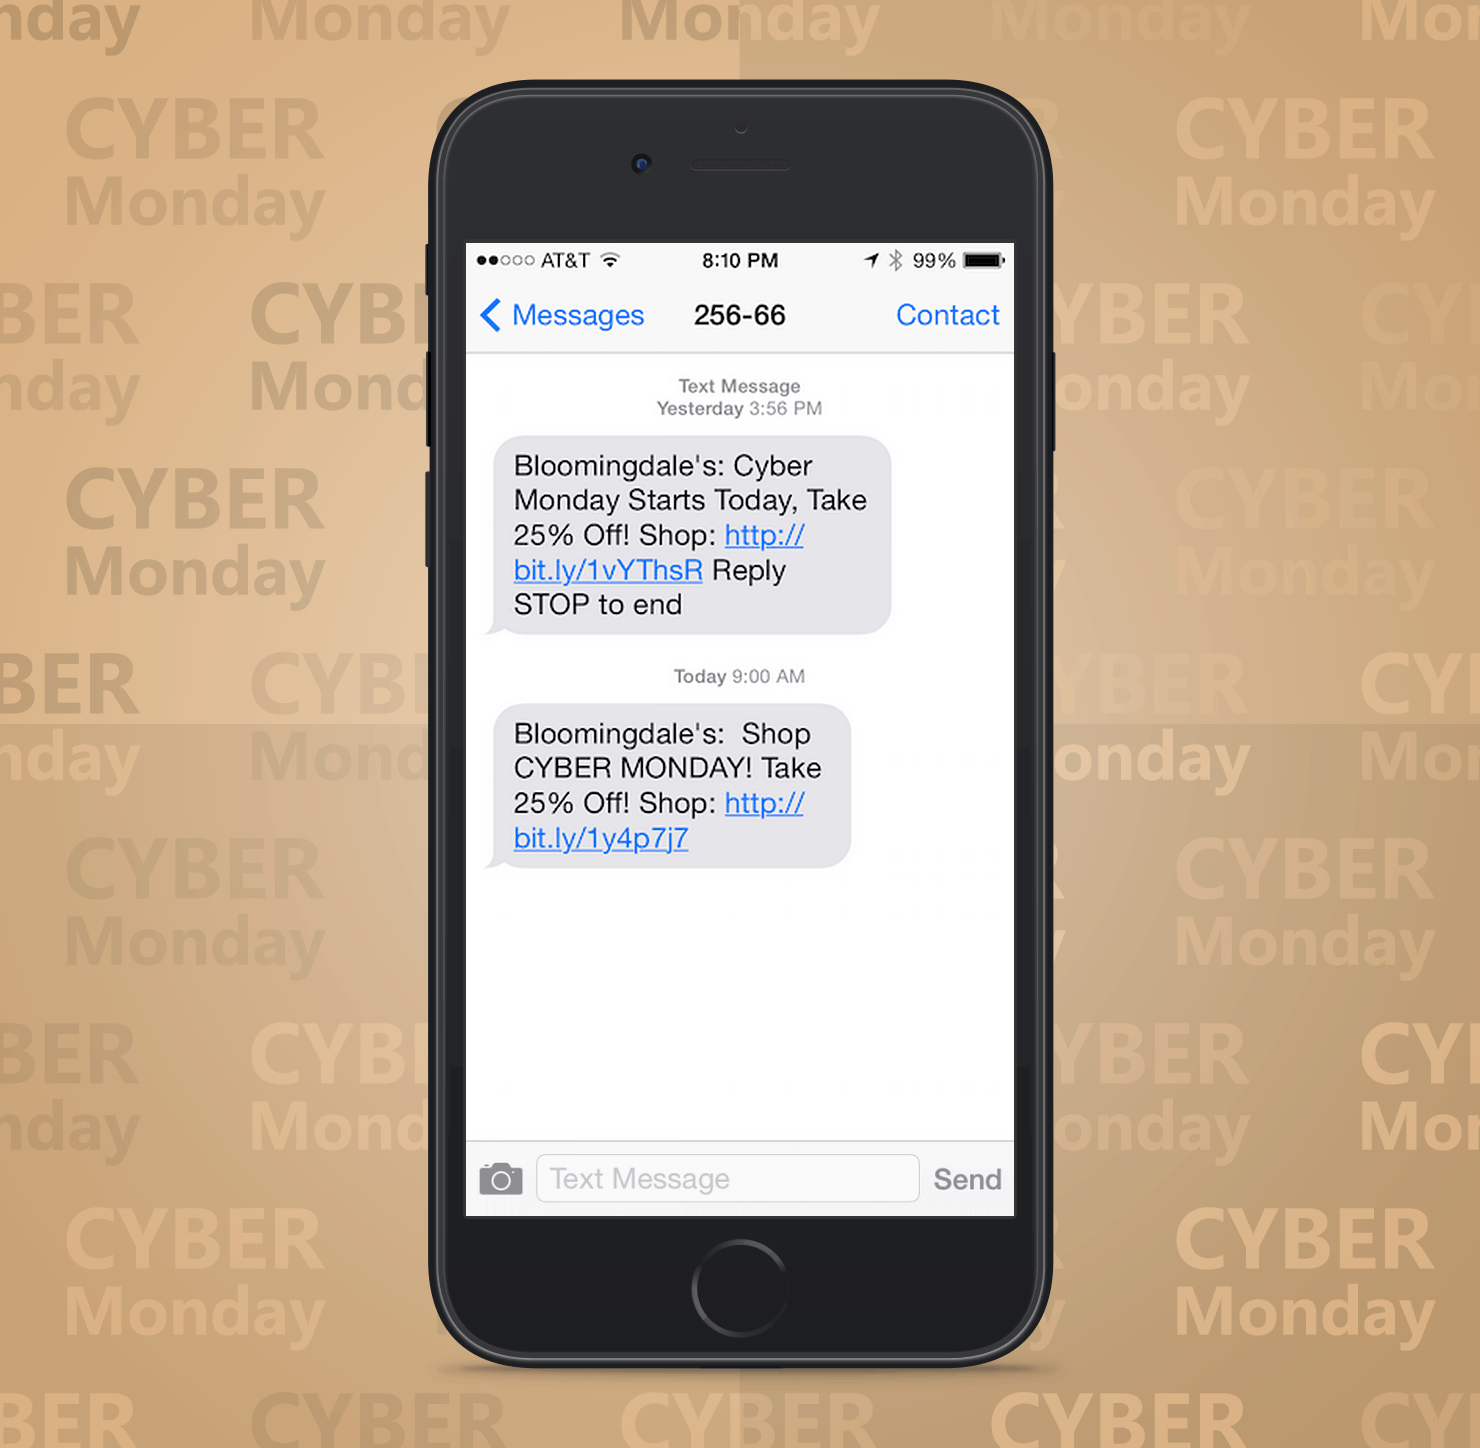 SMS Coupon Example Sent on Cyber Monday From Bloomindales Retail Stores to Customers